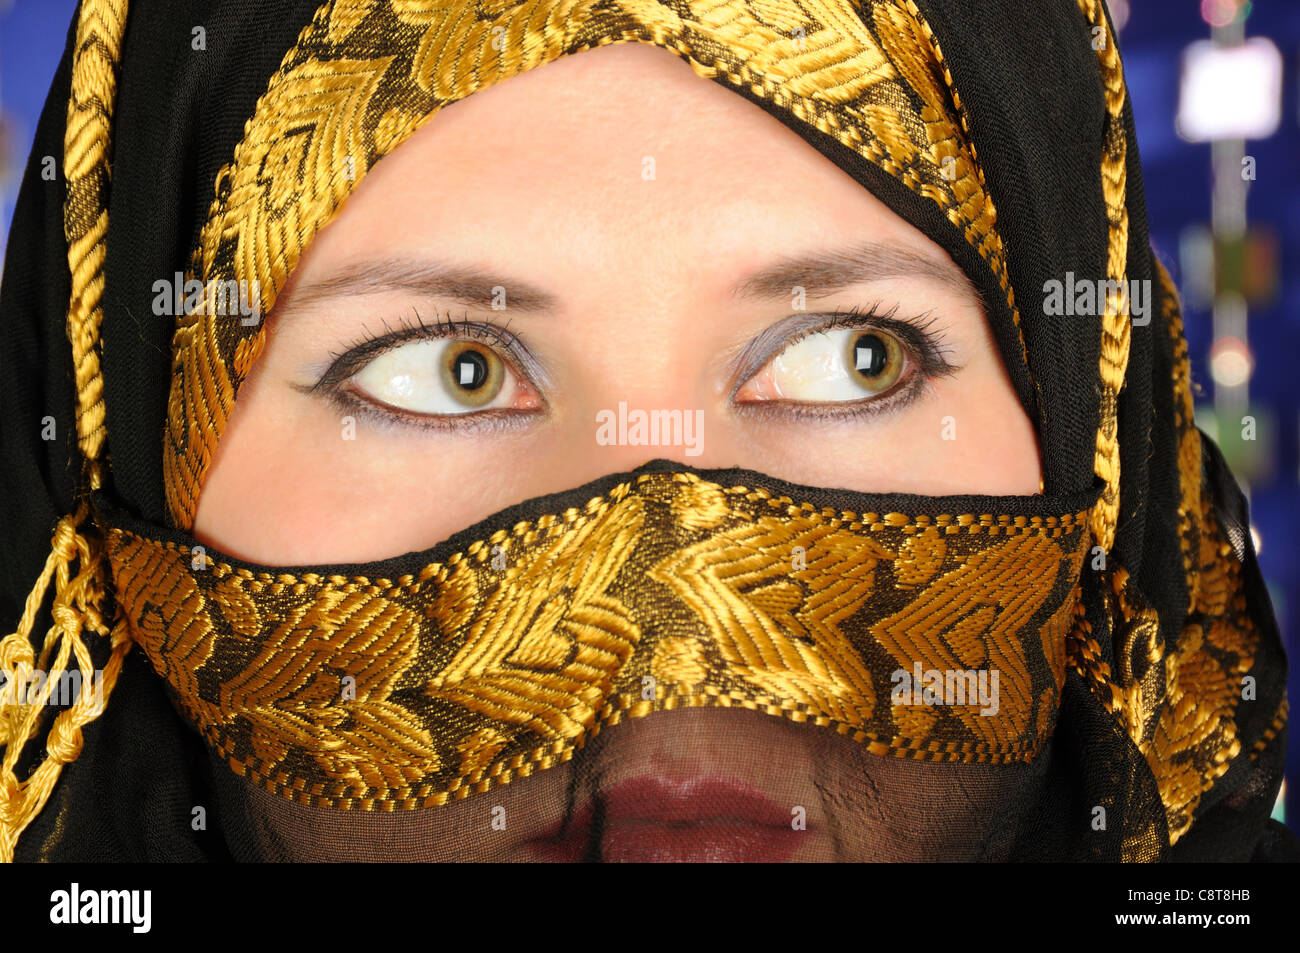 Close up picture of a Muslim woman cower face with a veil Stock Photo